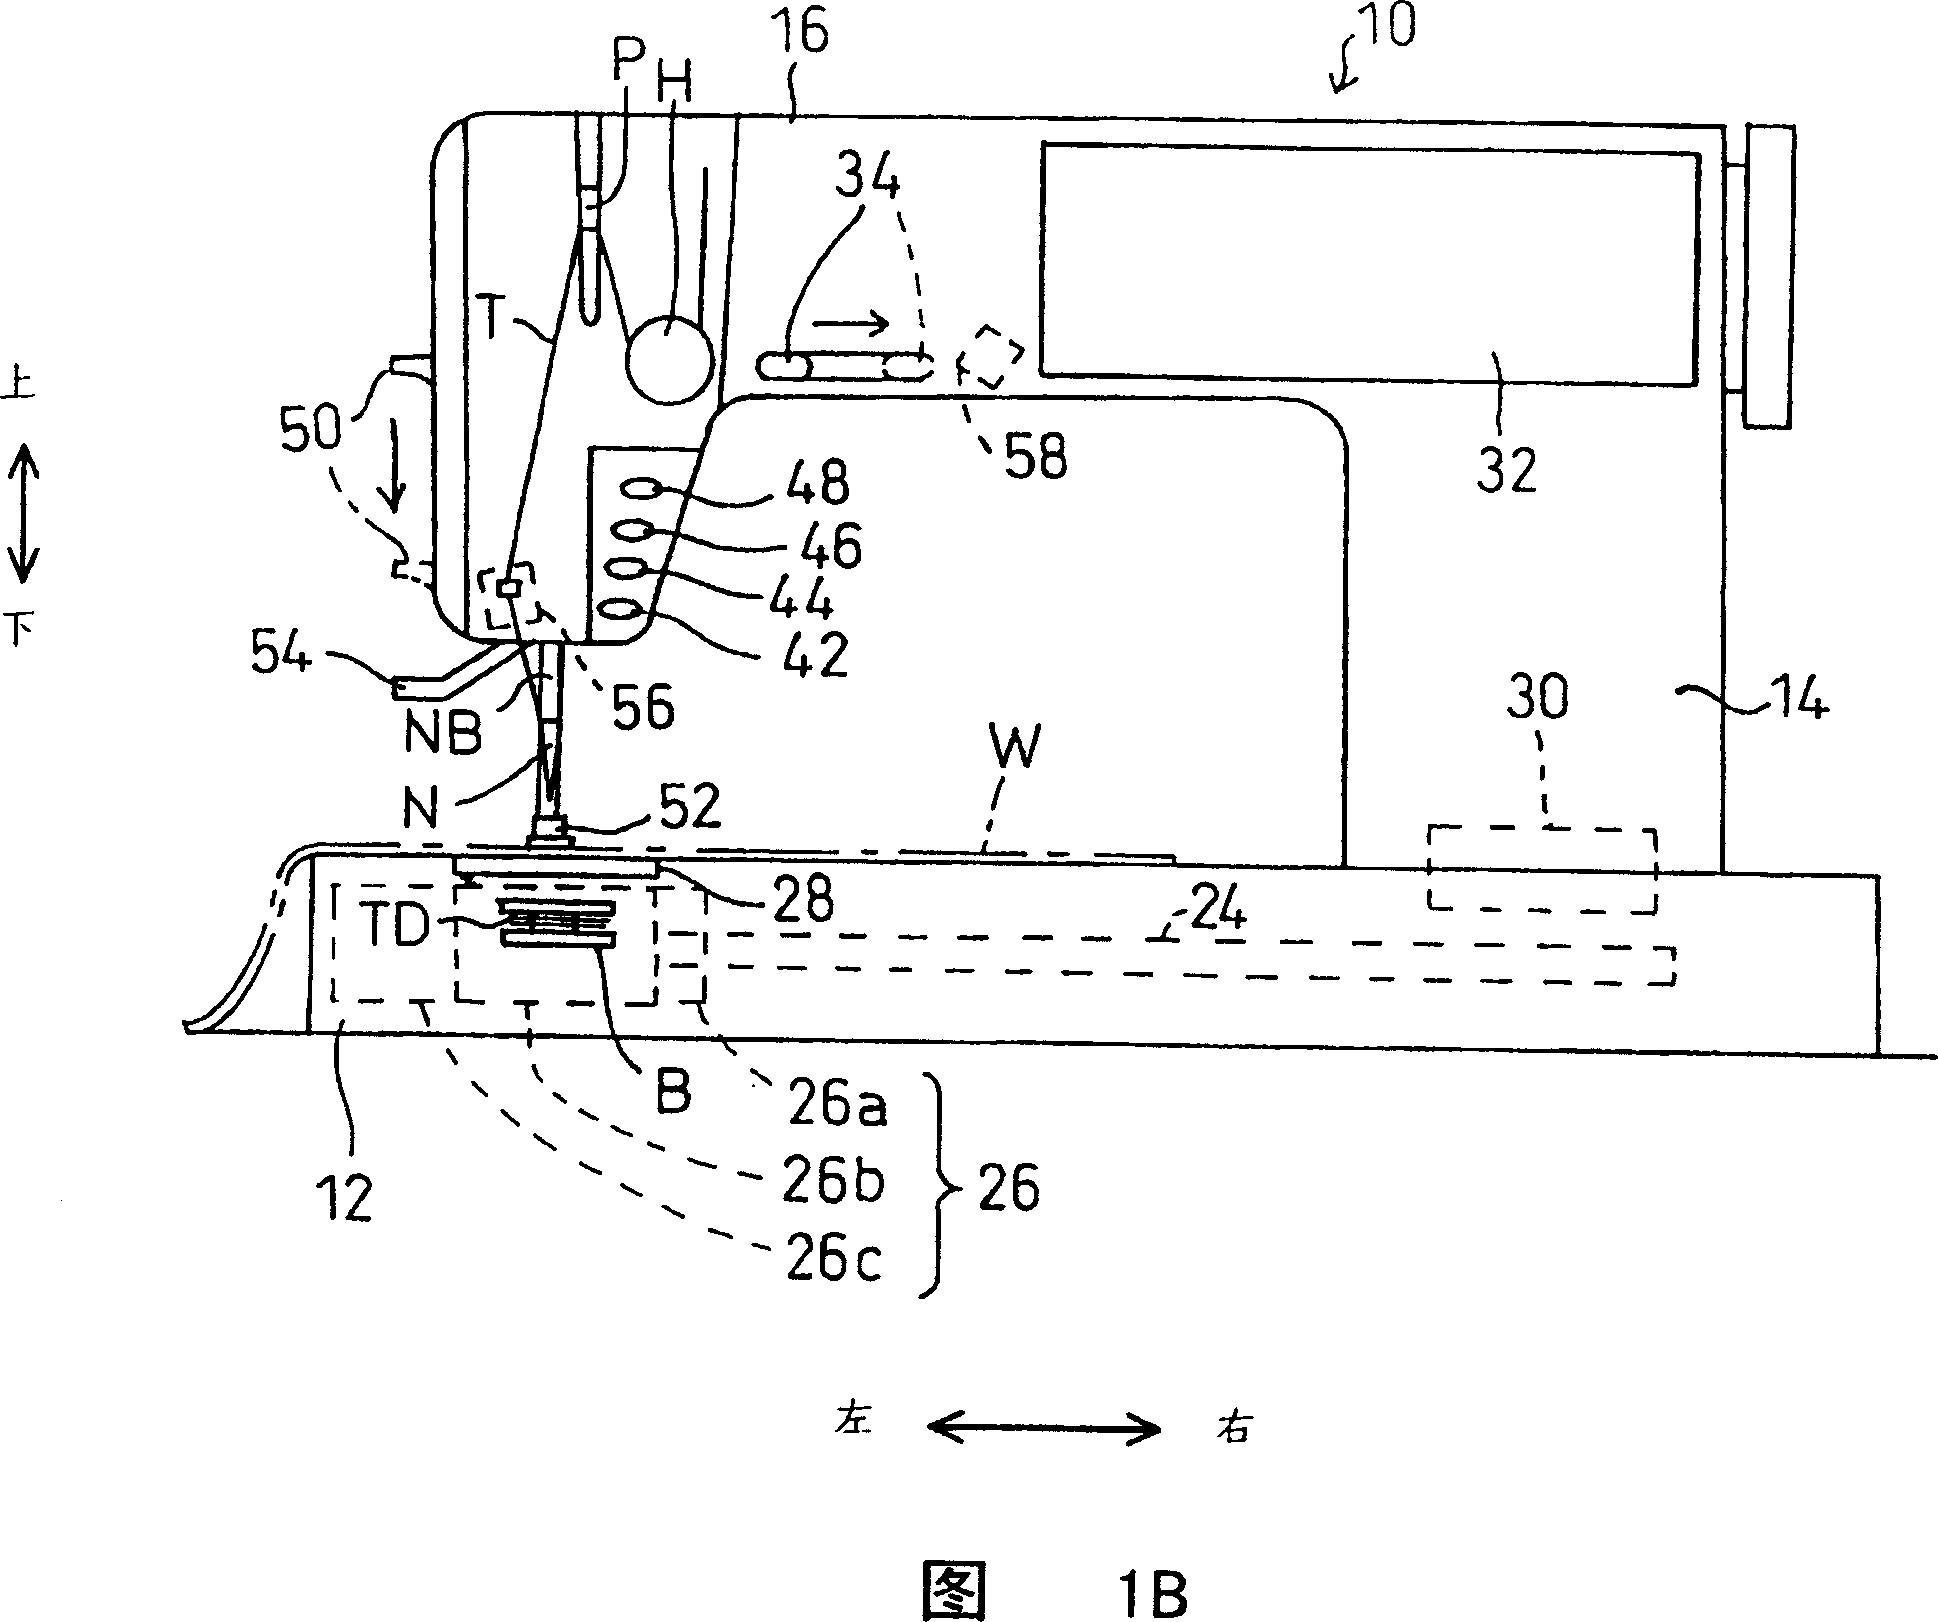 Sewing machine with improved thread cutting mechanism